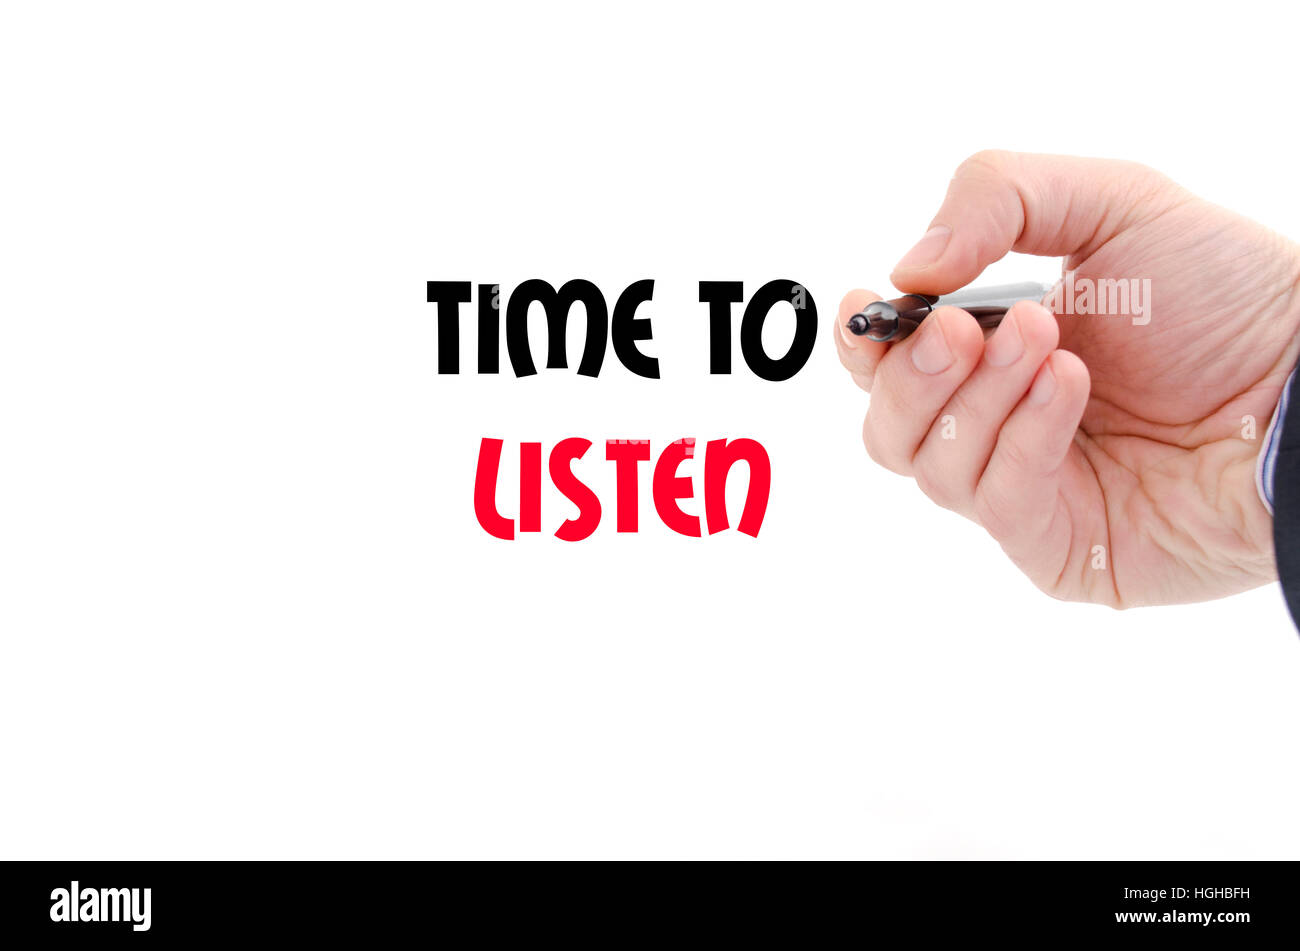 Time to listen text concept isolated over white background Stock Photo